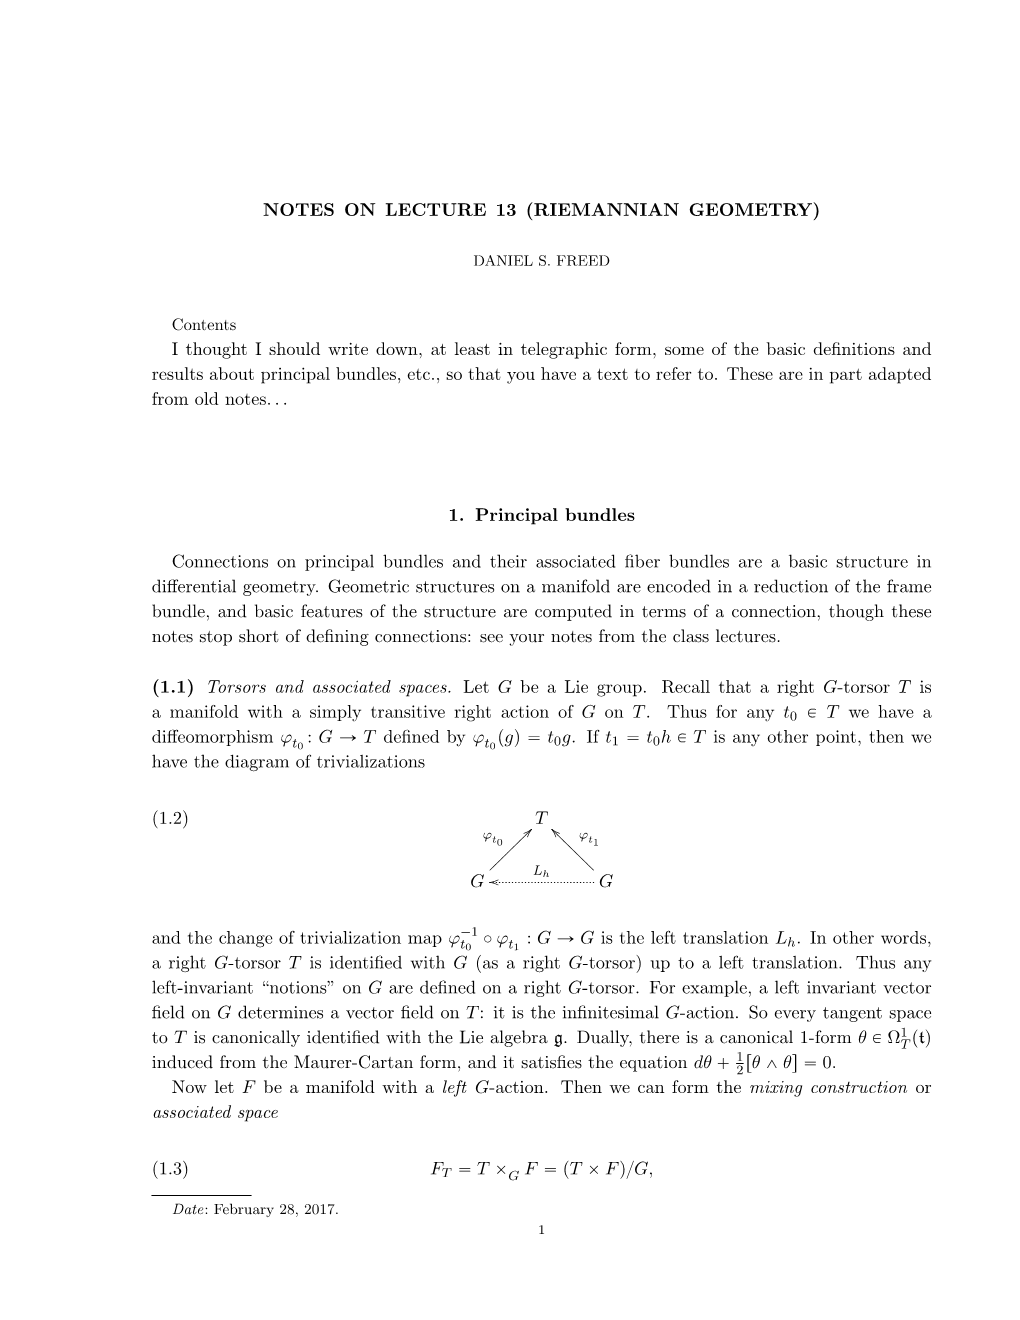 Notes on Lecture 13 (Riemannian Geometry)